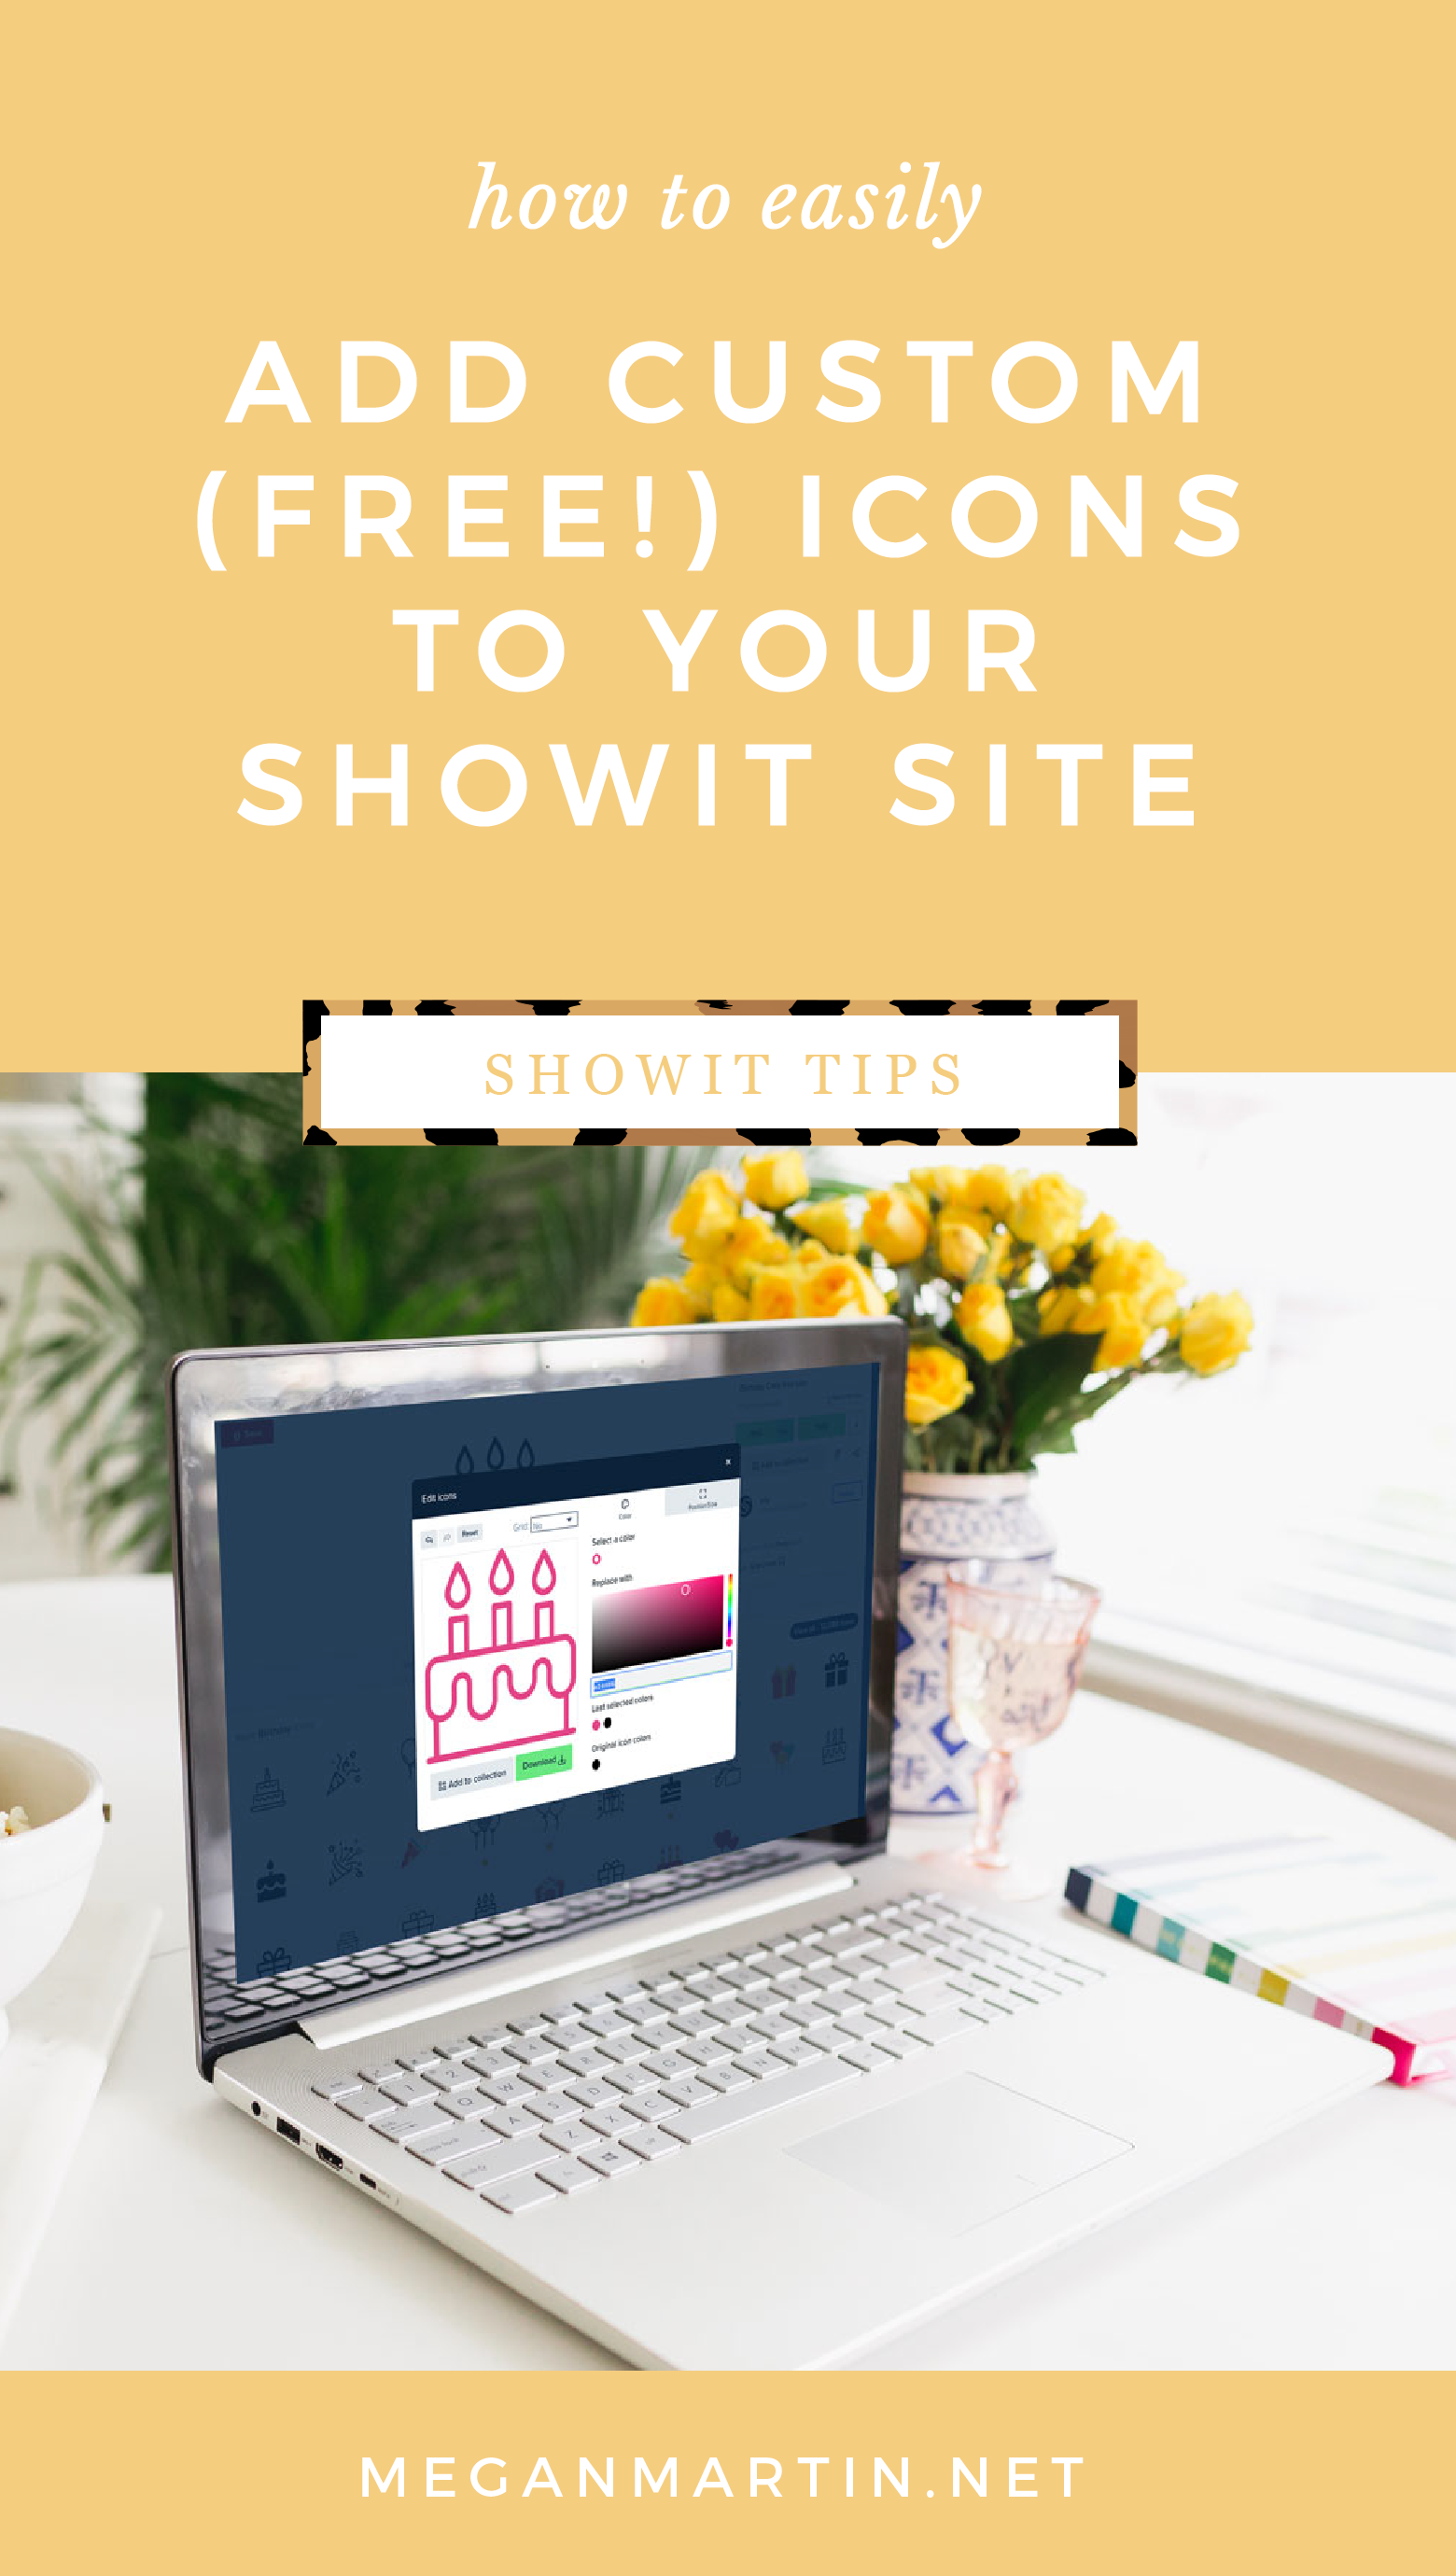 How to easily add icons to your Showit site for a custom look using Flaticon!